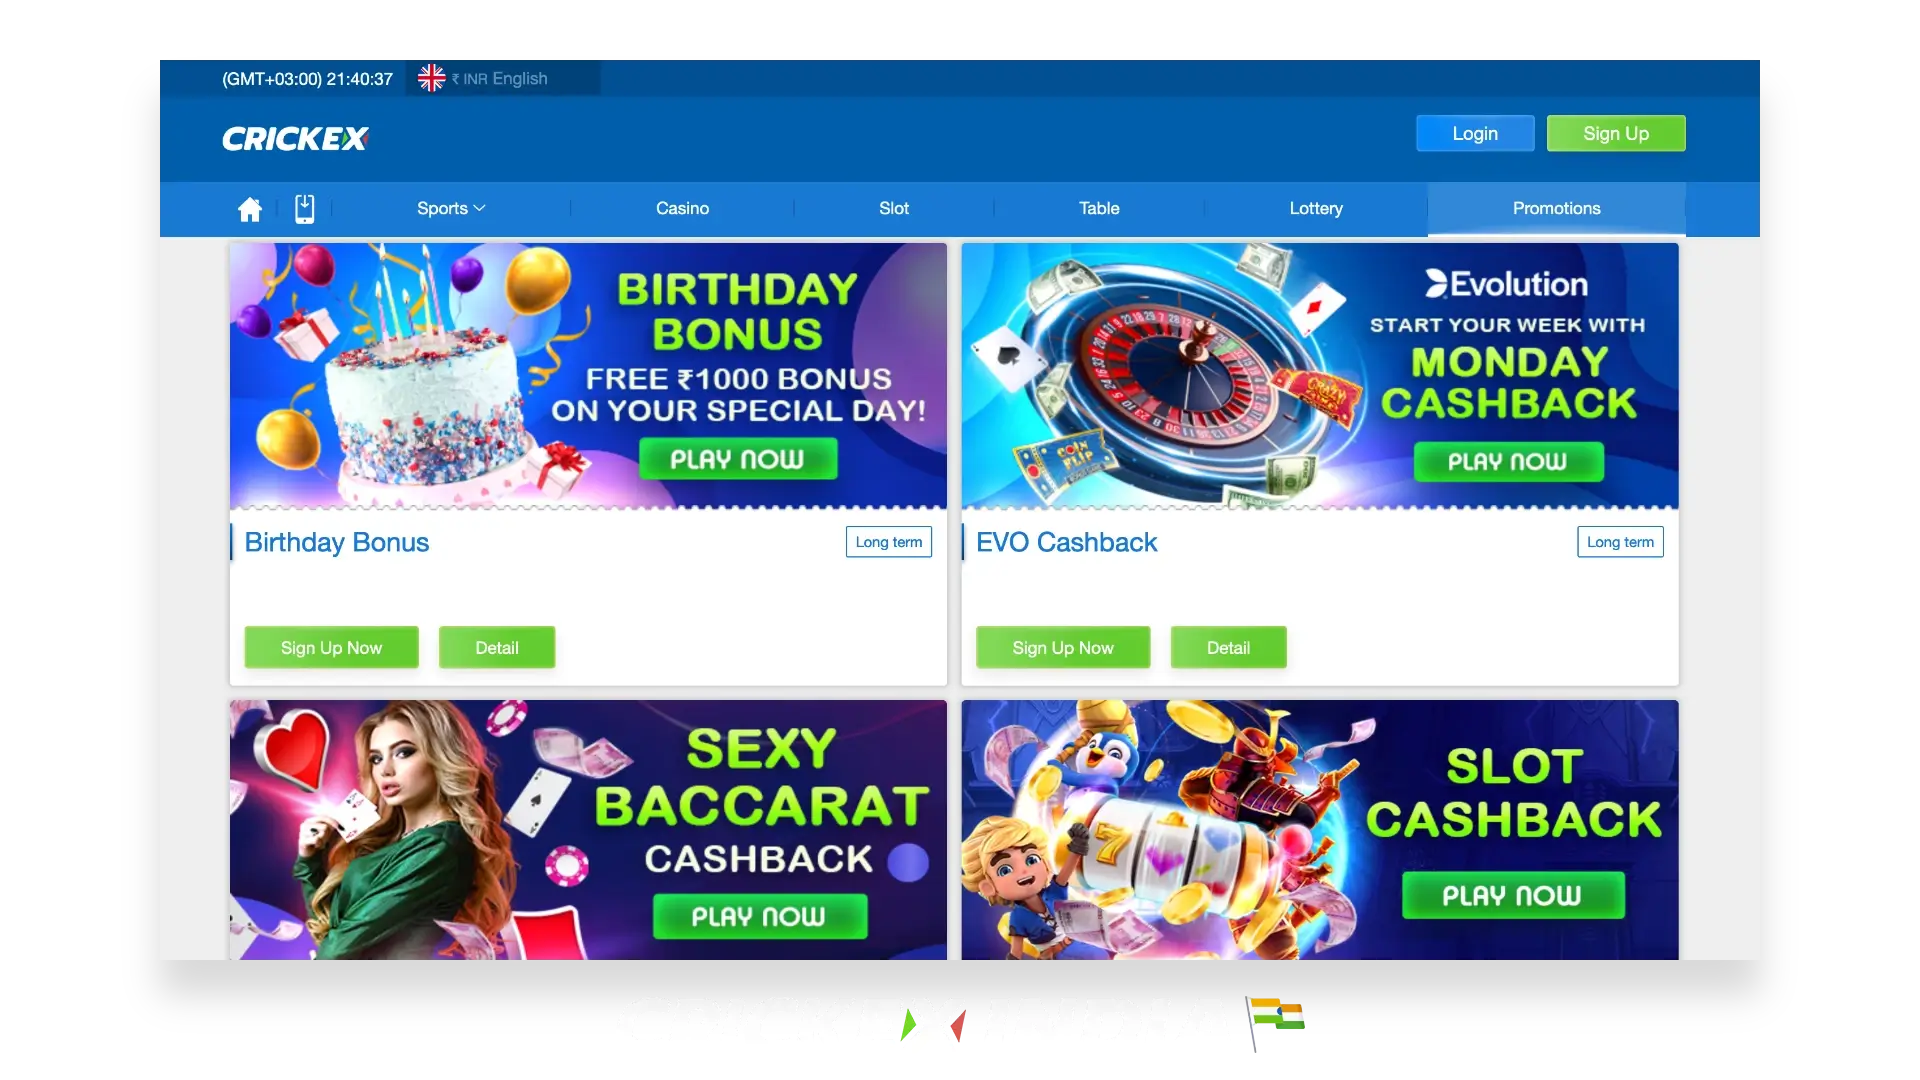 Detailed information about current bonuses and promotions available to Crickex India customers